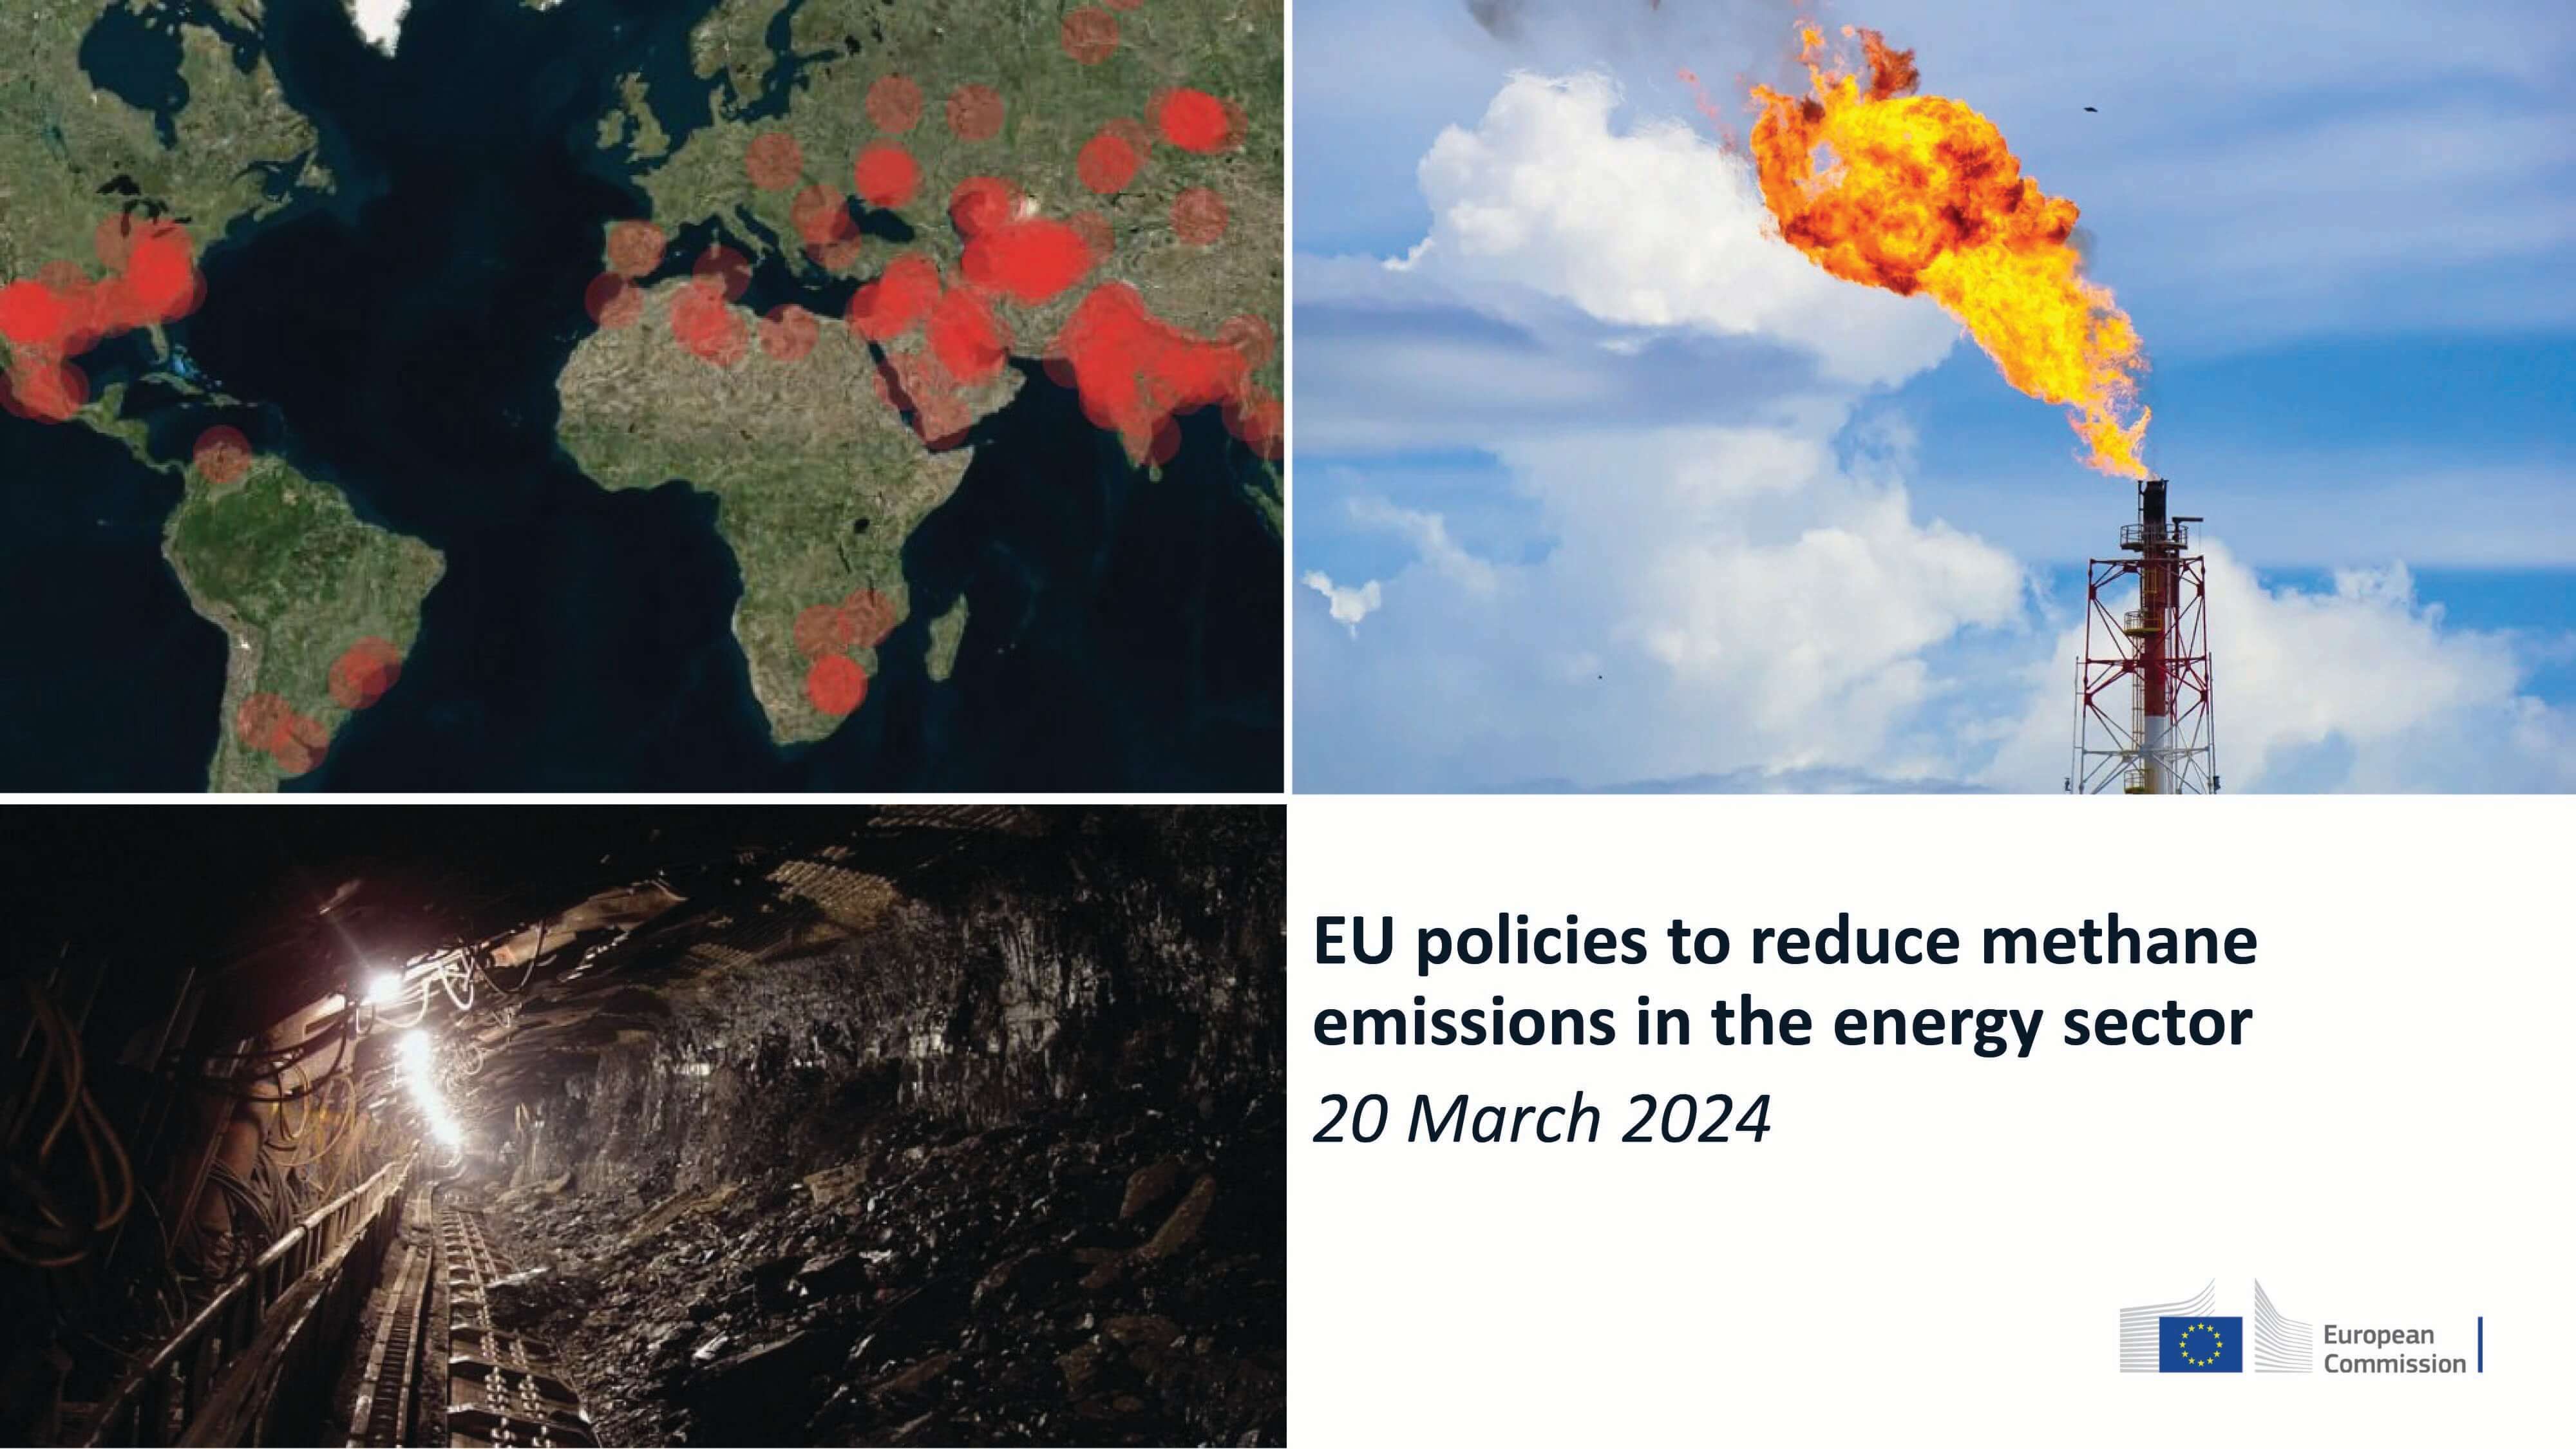 EU Policies to Reduce Methane Emissions in the Energy Sector